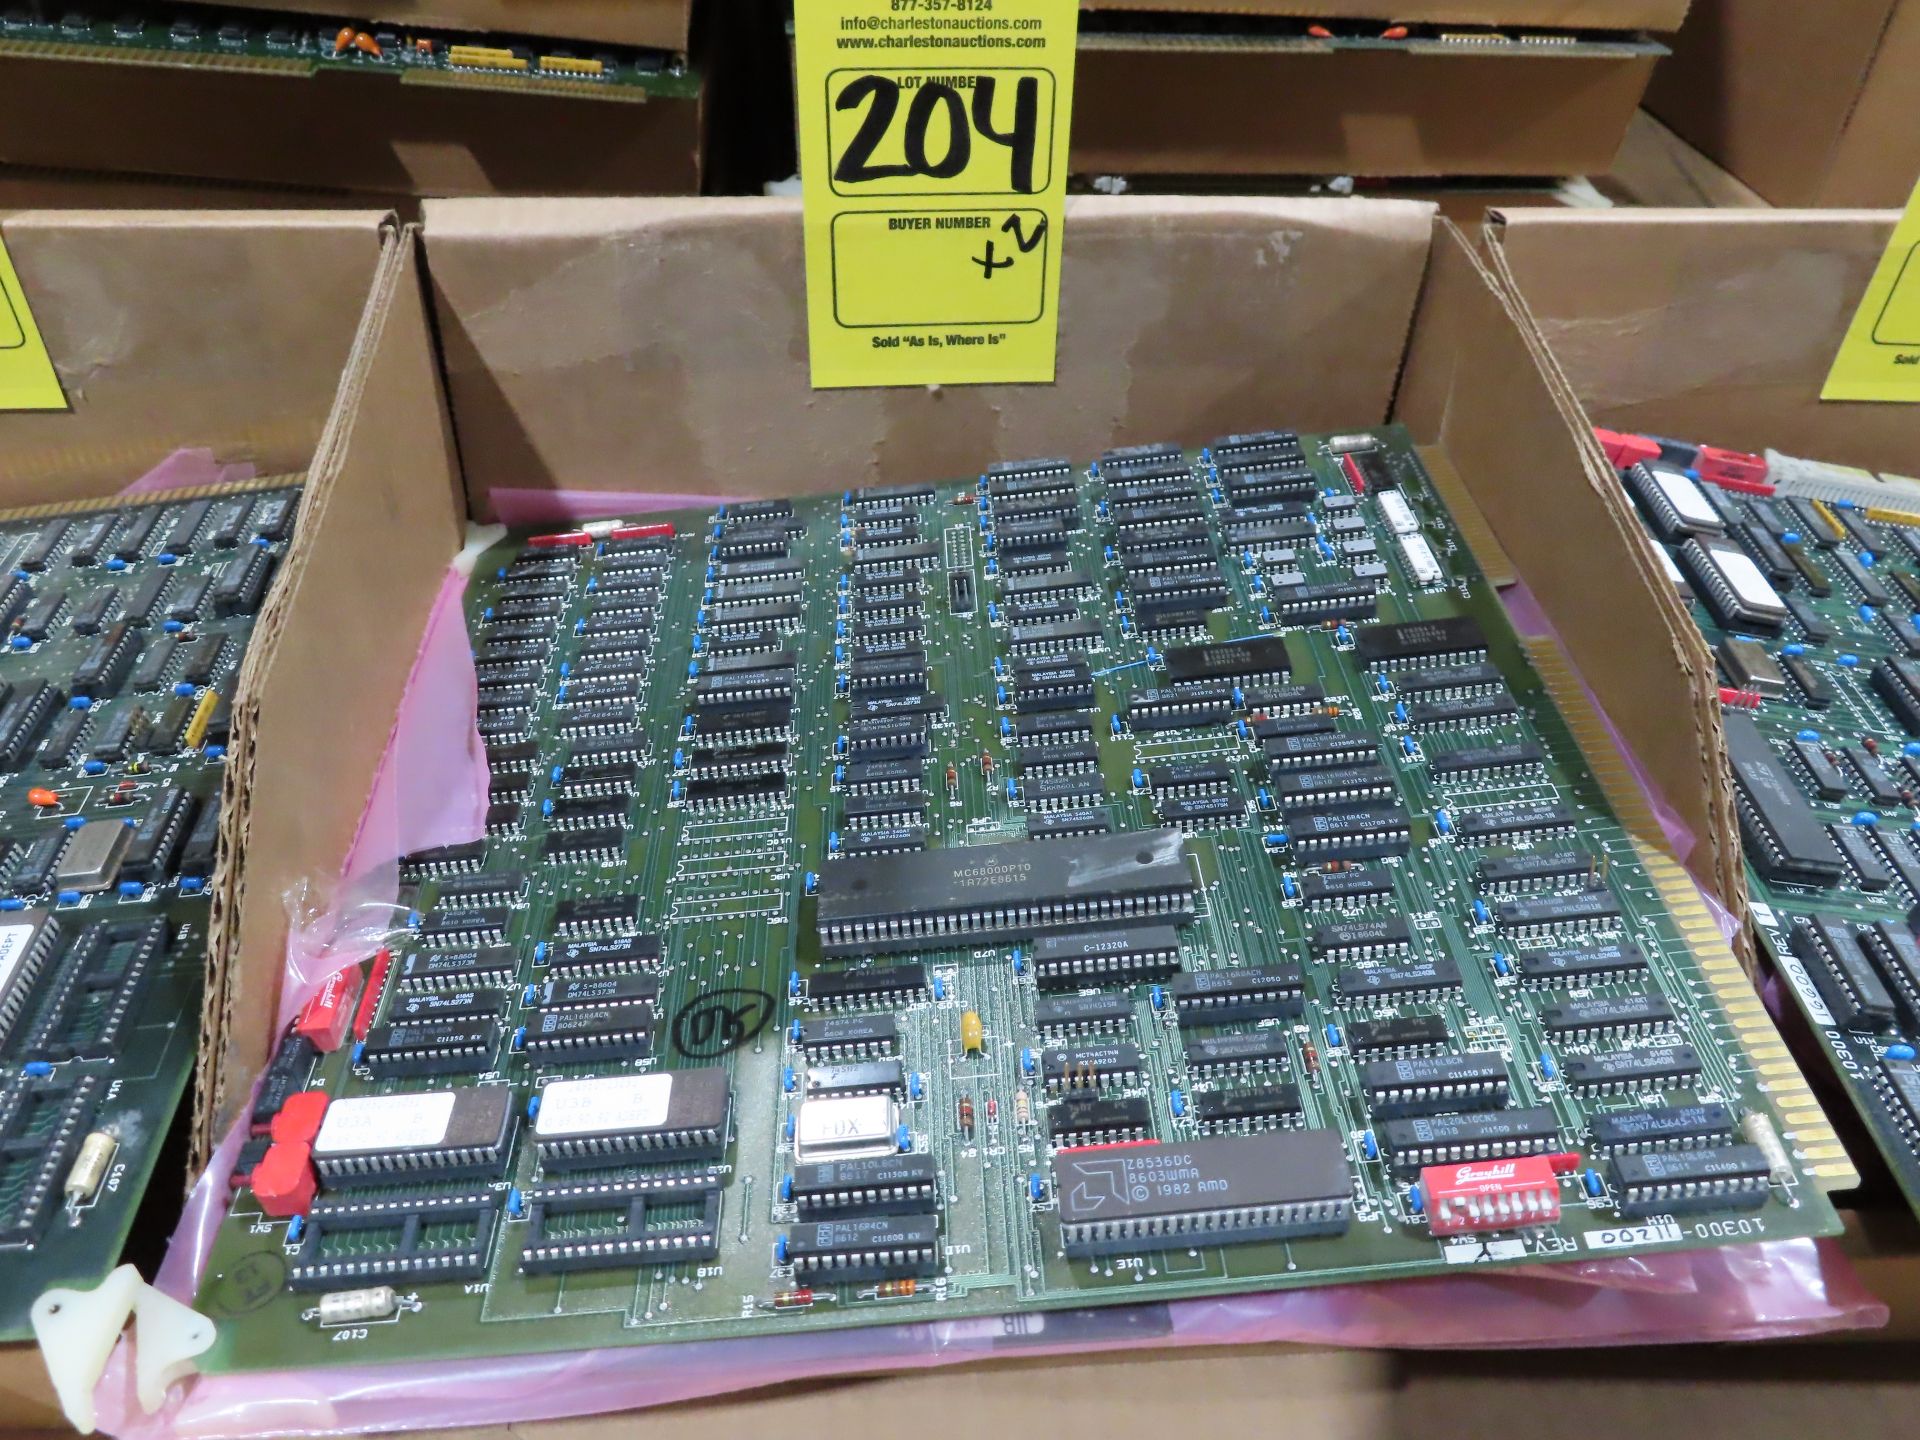 Qty 2 Adept 10300-11200 Rev Y, joint interface board, as always, with Brolyn LLC auctions, all lots